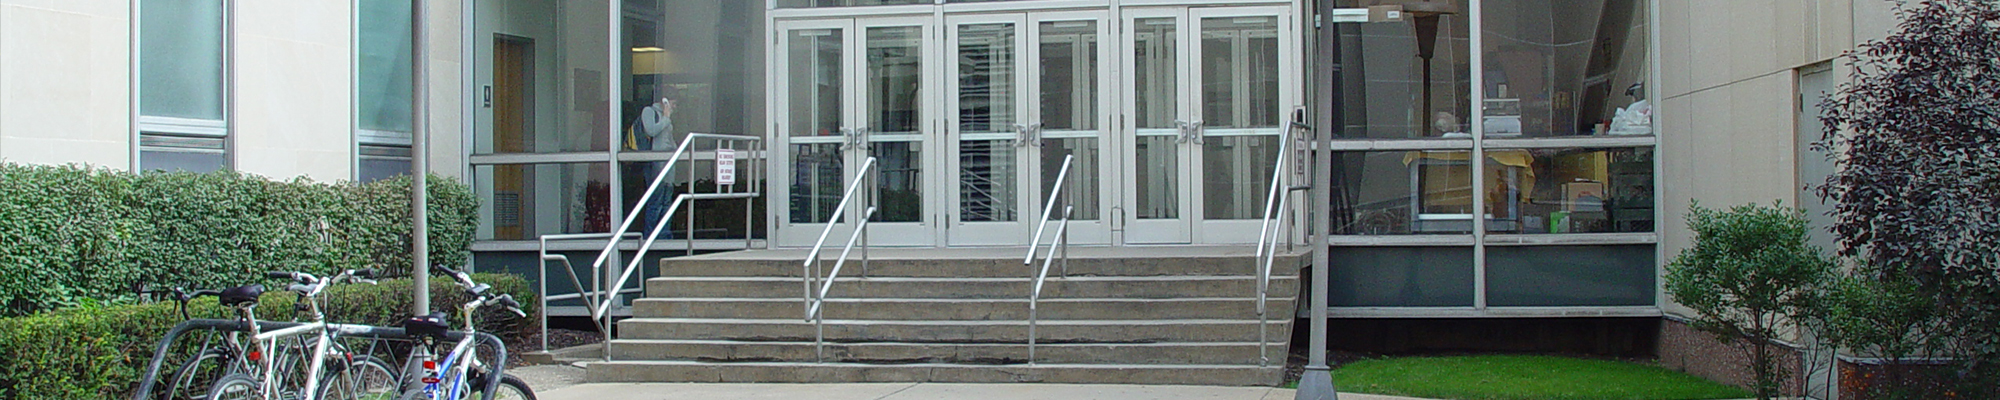 Outside view of the entrance steps and doors to Langley Hall